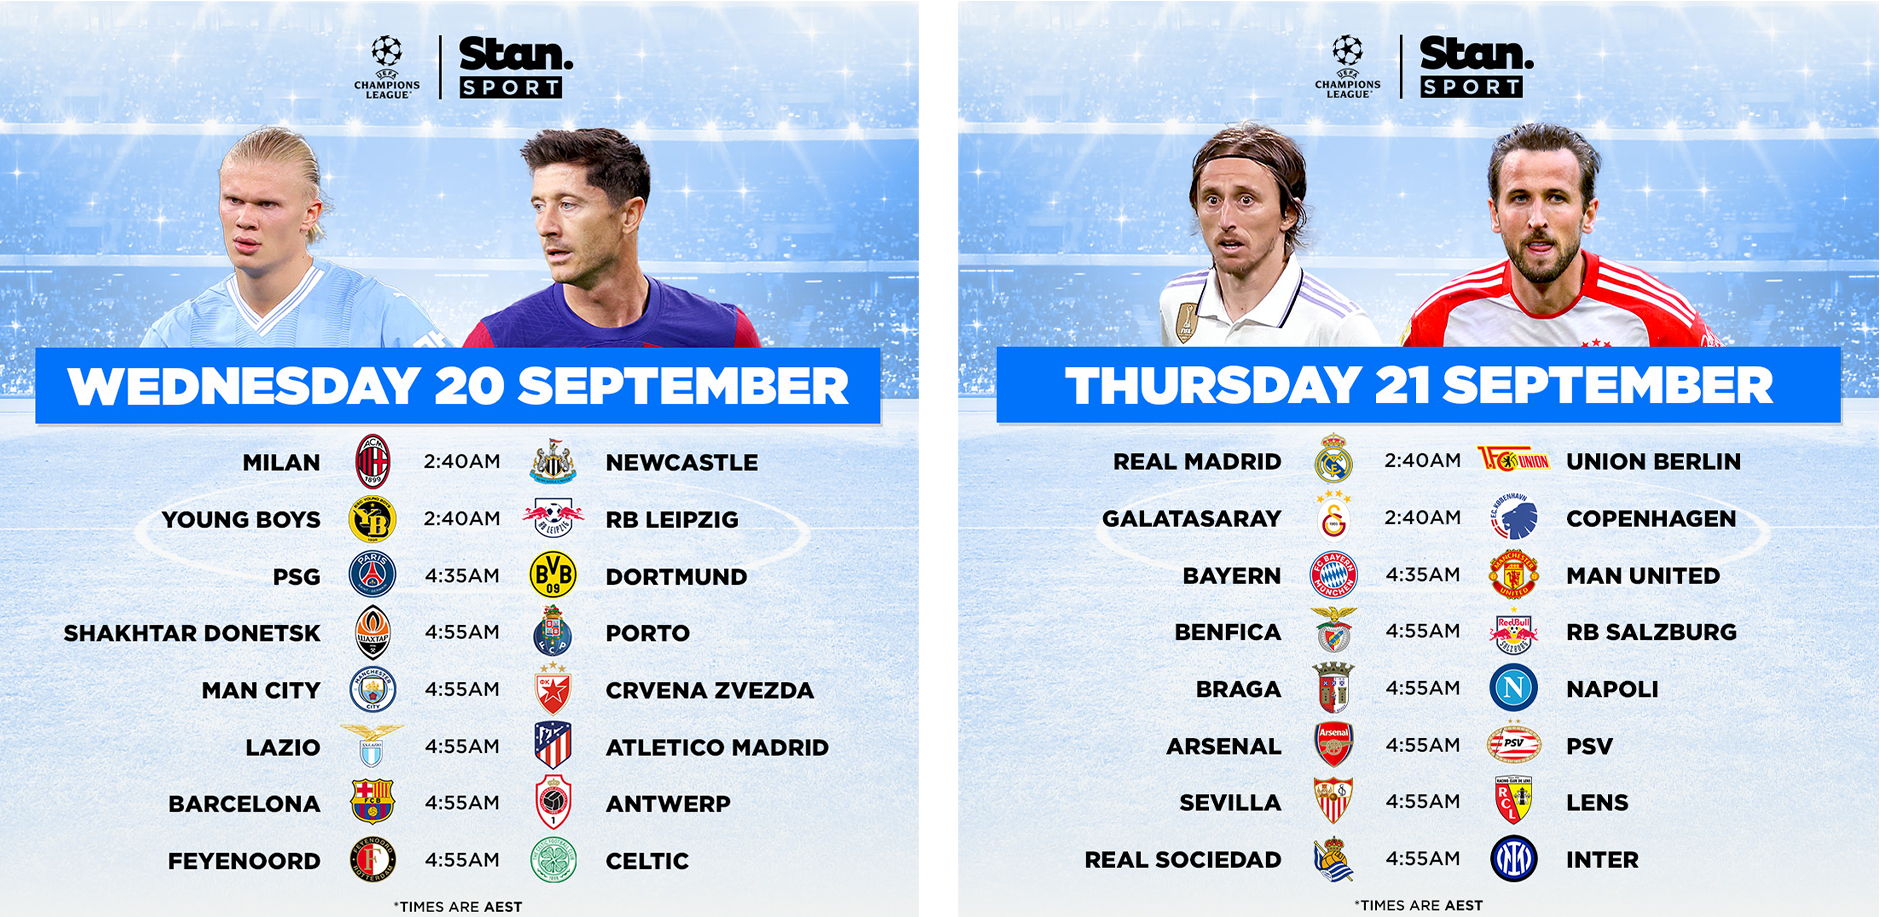 UEFA Champions League Matchday 1 schedule